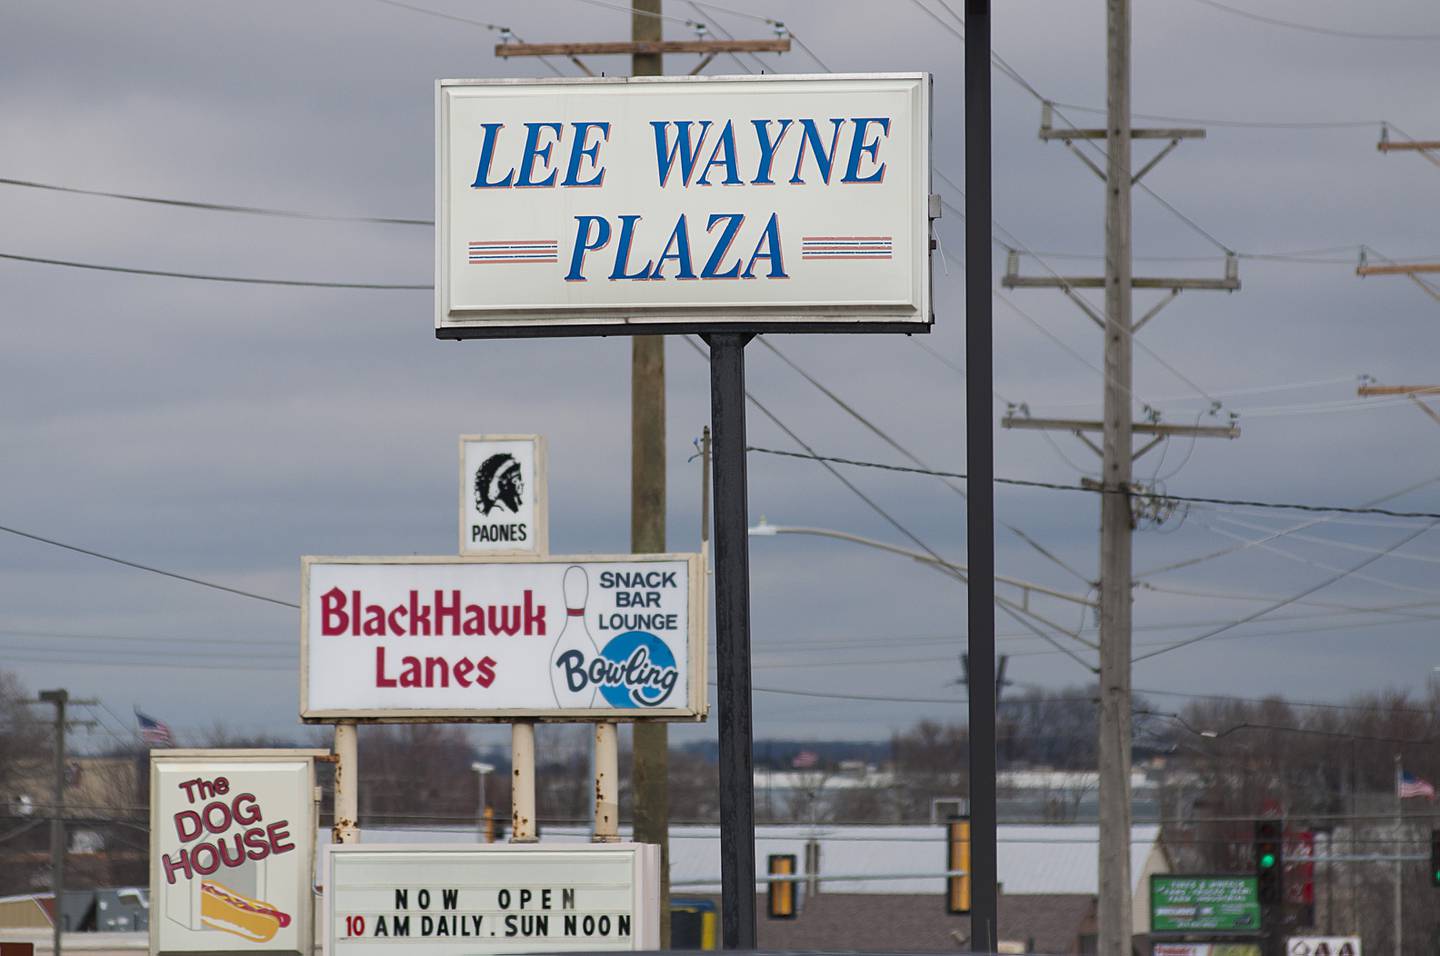 In May, Sterling native Kit Kyarsgaard, owner of SKR Rentals and SKR Acquisitions, also bought Lee Wayne Plaza.